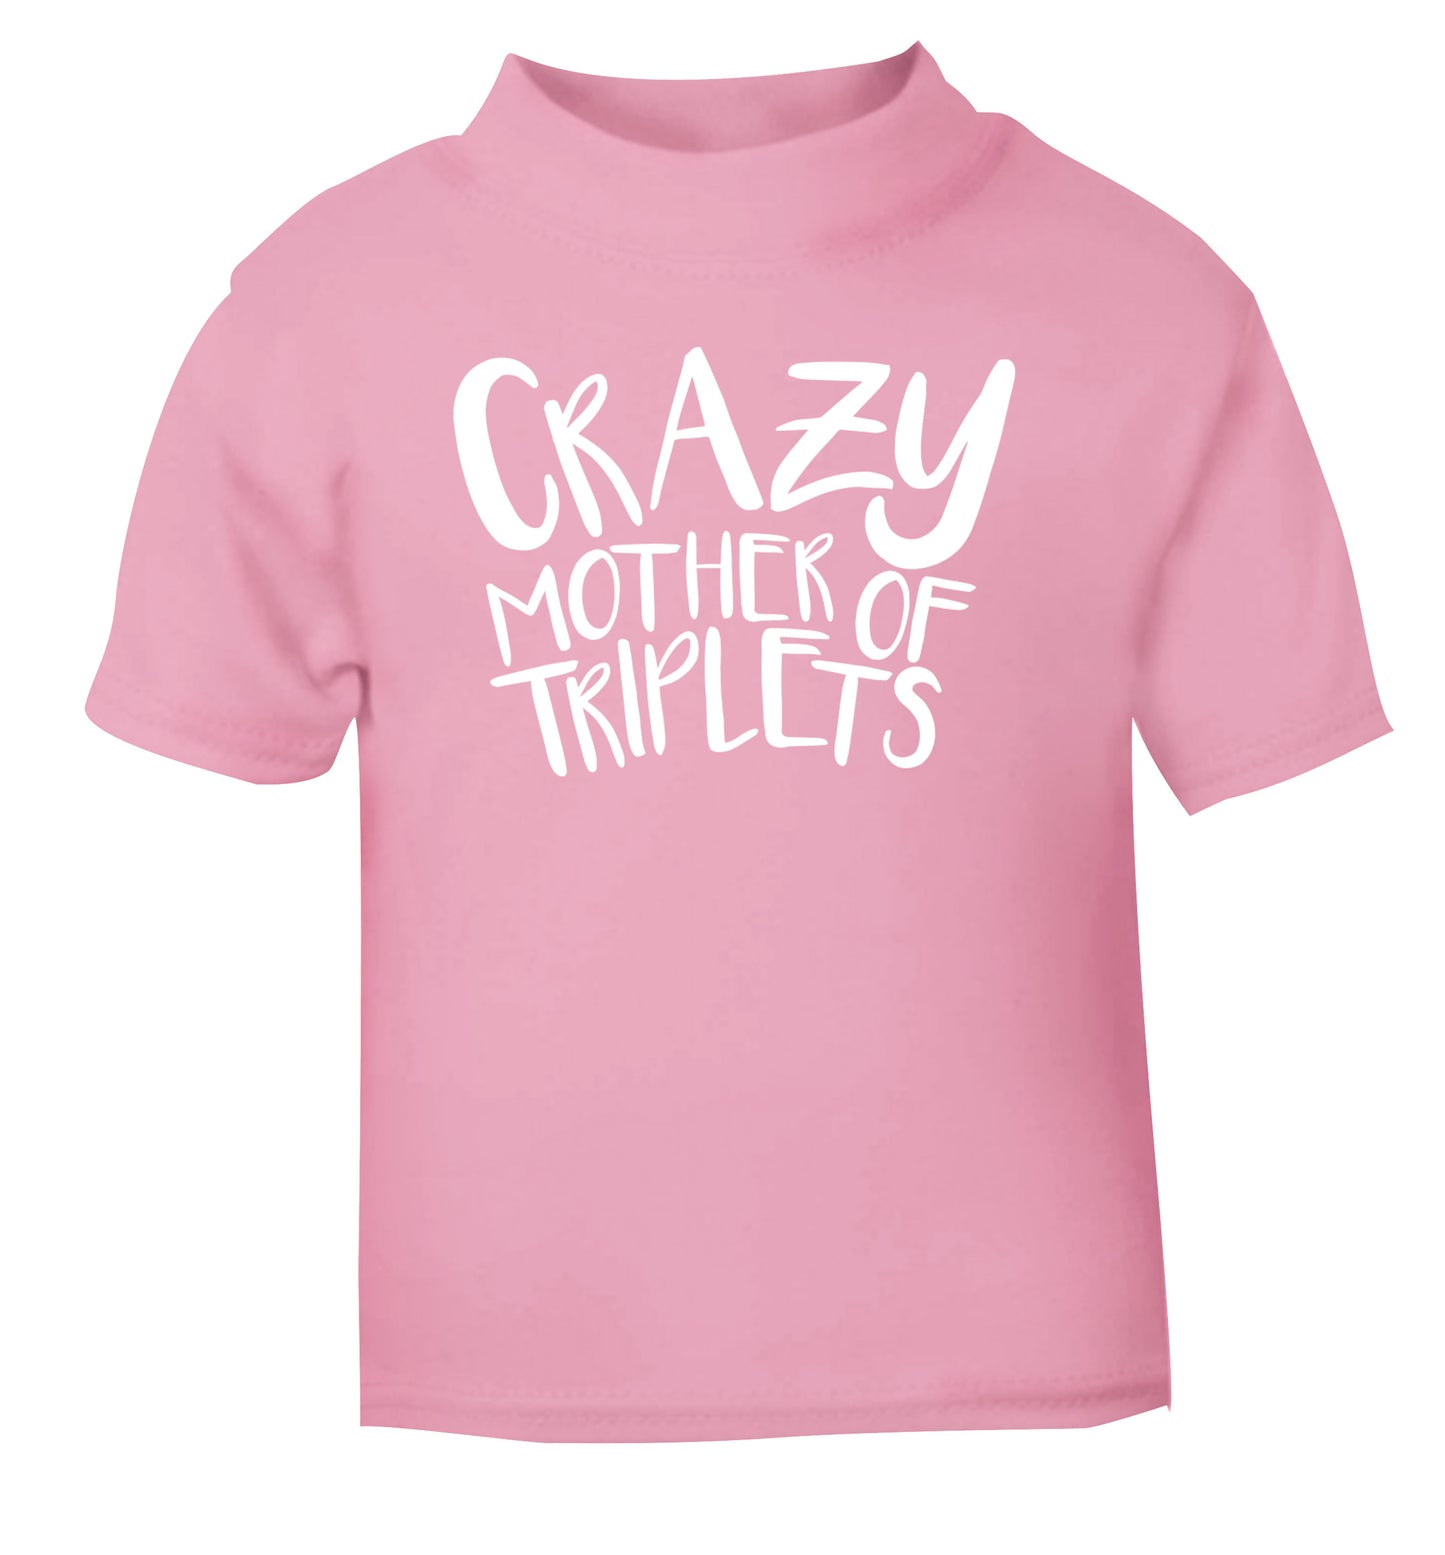 Crazy mother of triplets light pink baby toddler Tshirt 2 Years